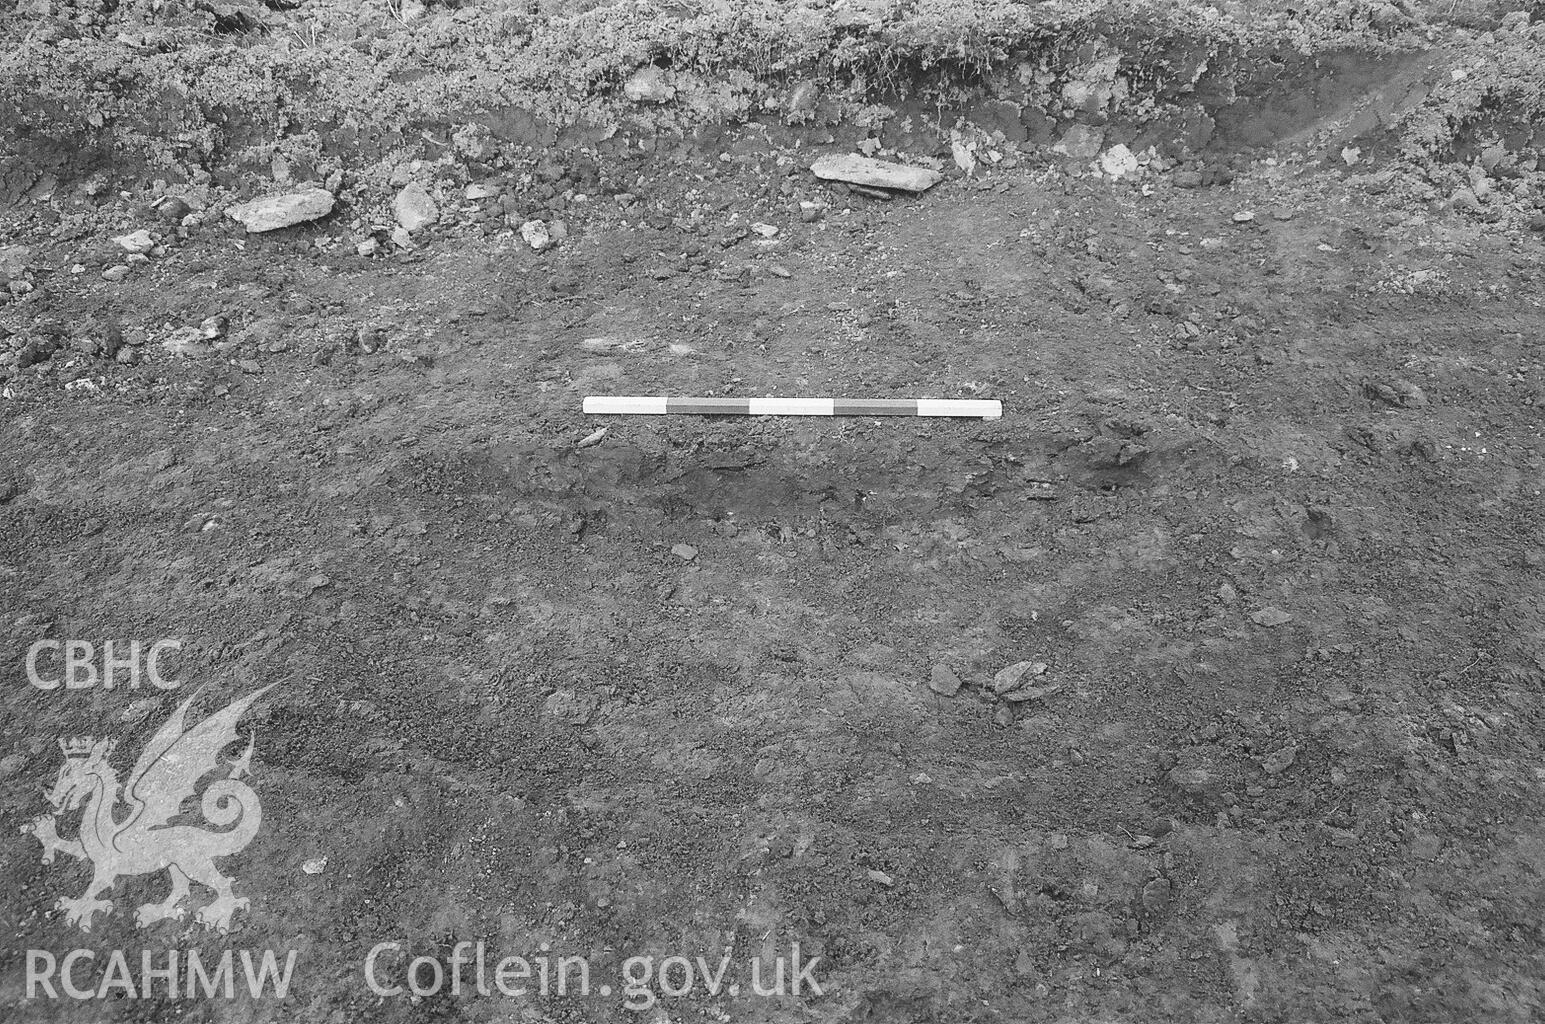 Photo taken during Archaeological Evaluation of land at Langton Farm, Scleddau, commissioned by CgMS. Produced by Headland Archaeology (UK) Ltd., March 2015.